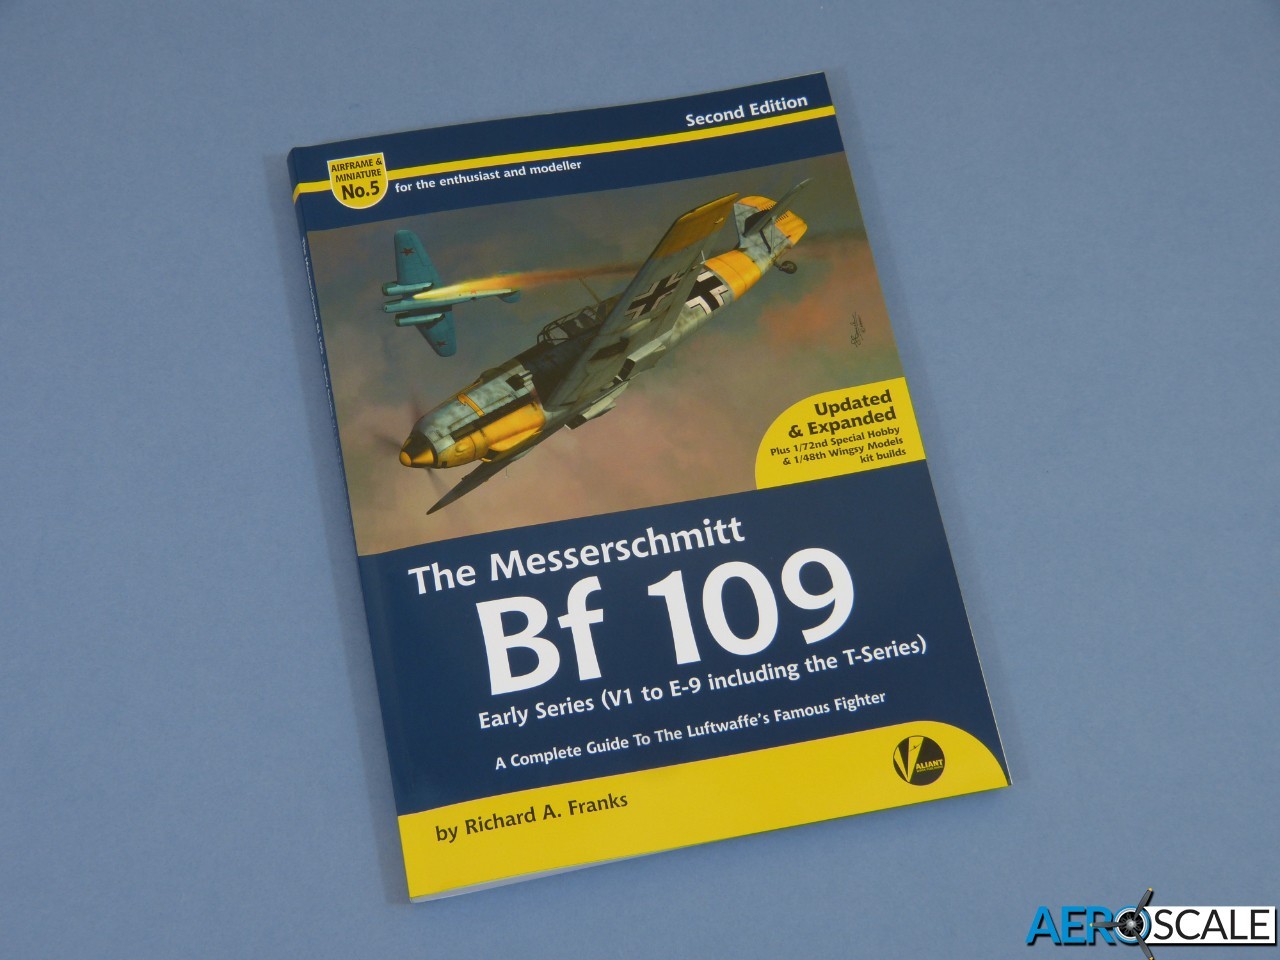 Airframe & Miniature #5 - Bf 109 Early Series